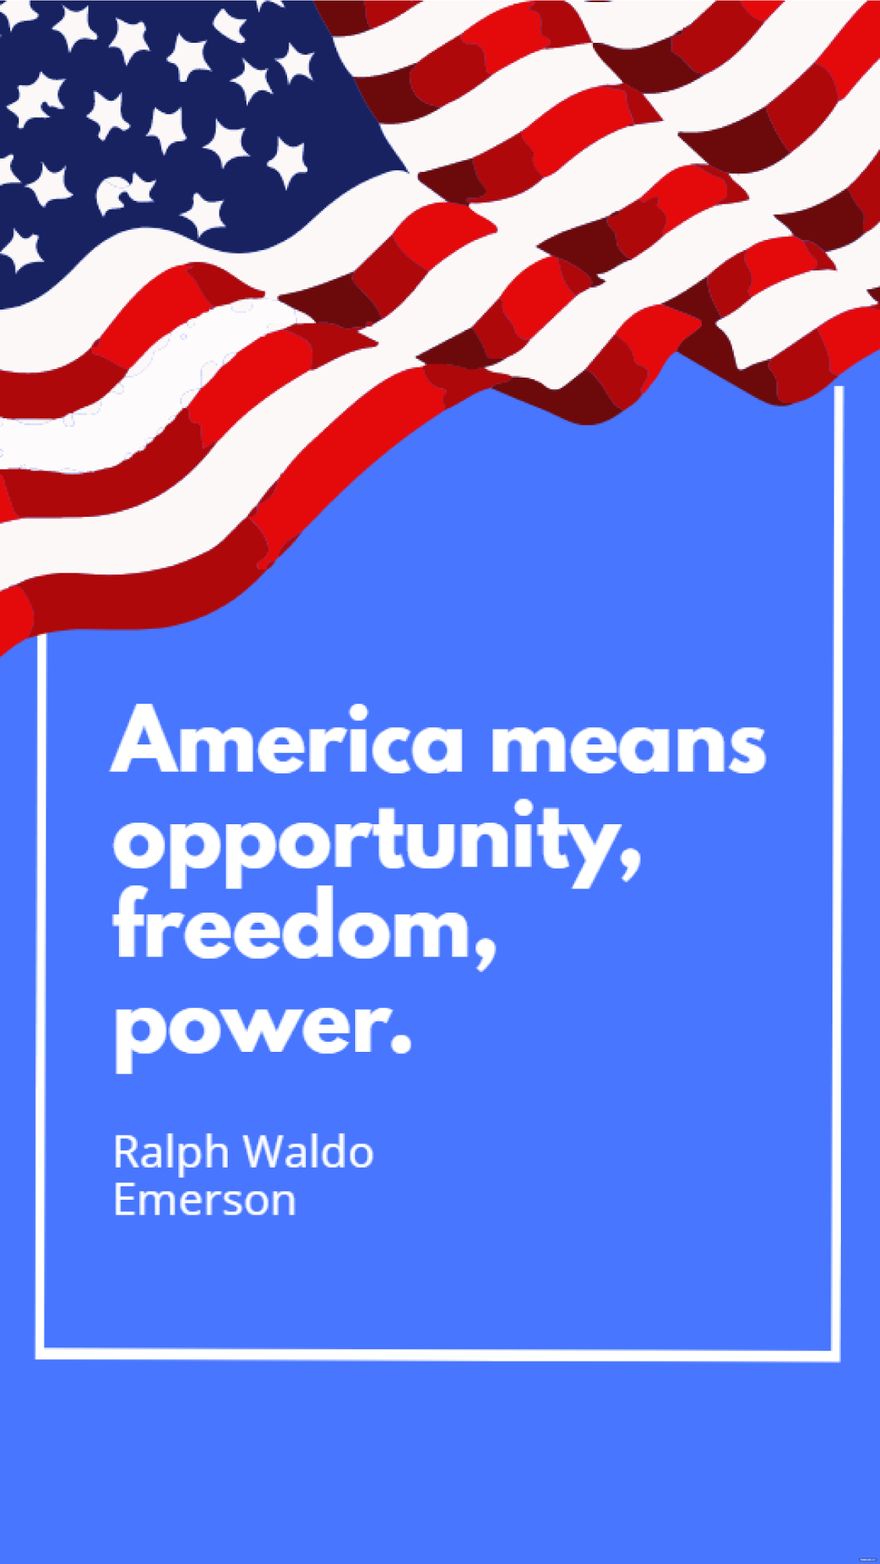 Ralph Waldo Emerson - America means opportunity, freedom, power. Template